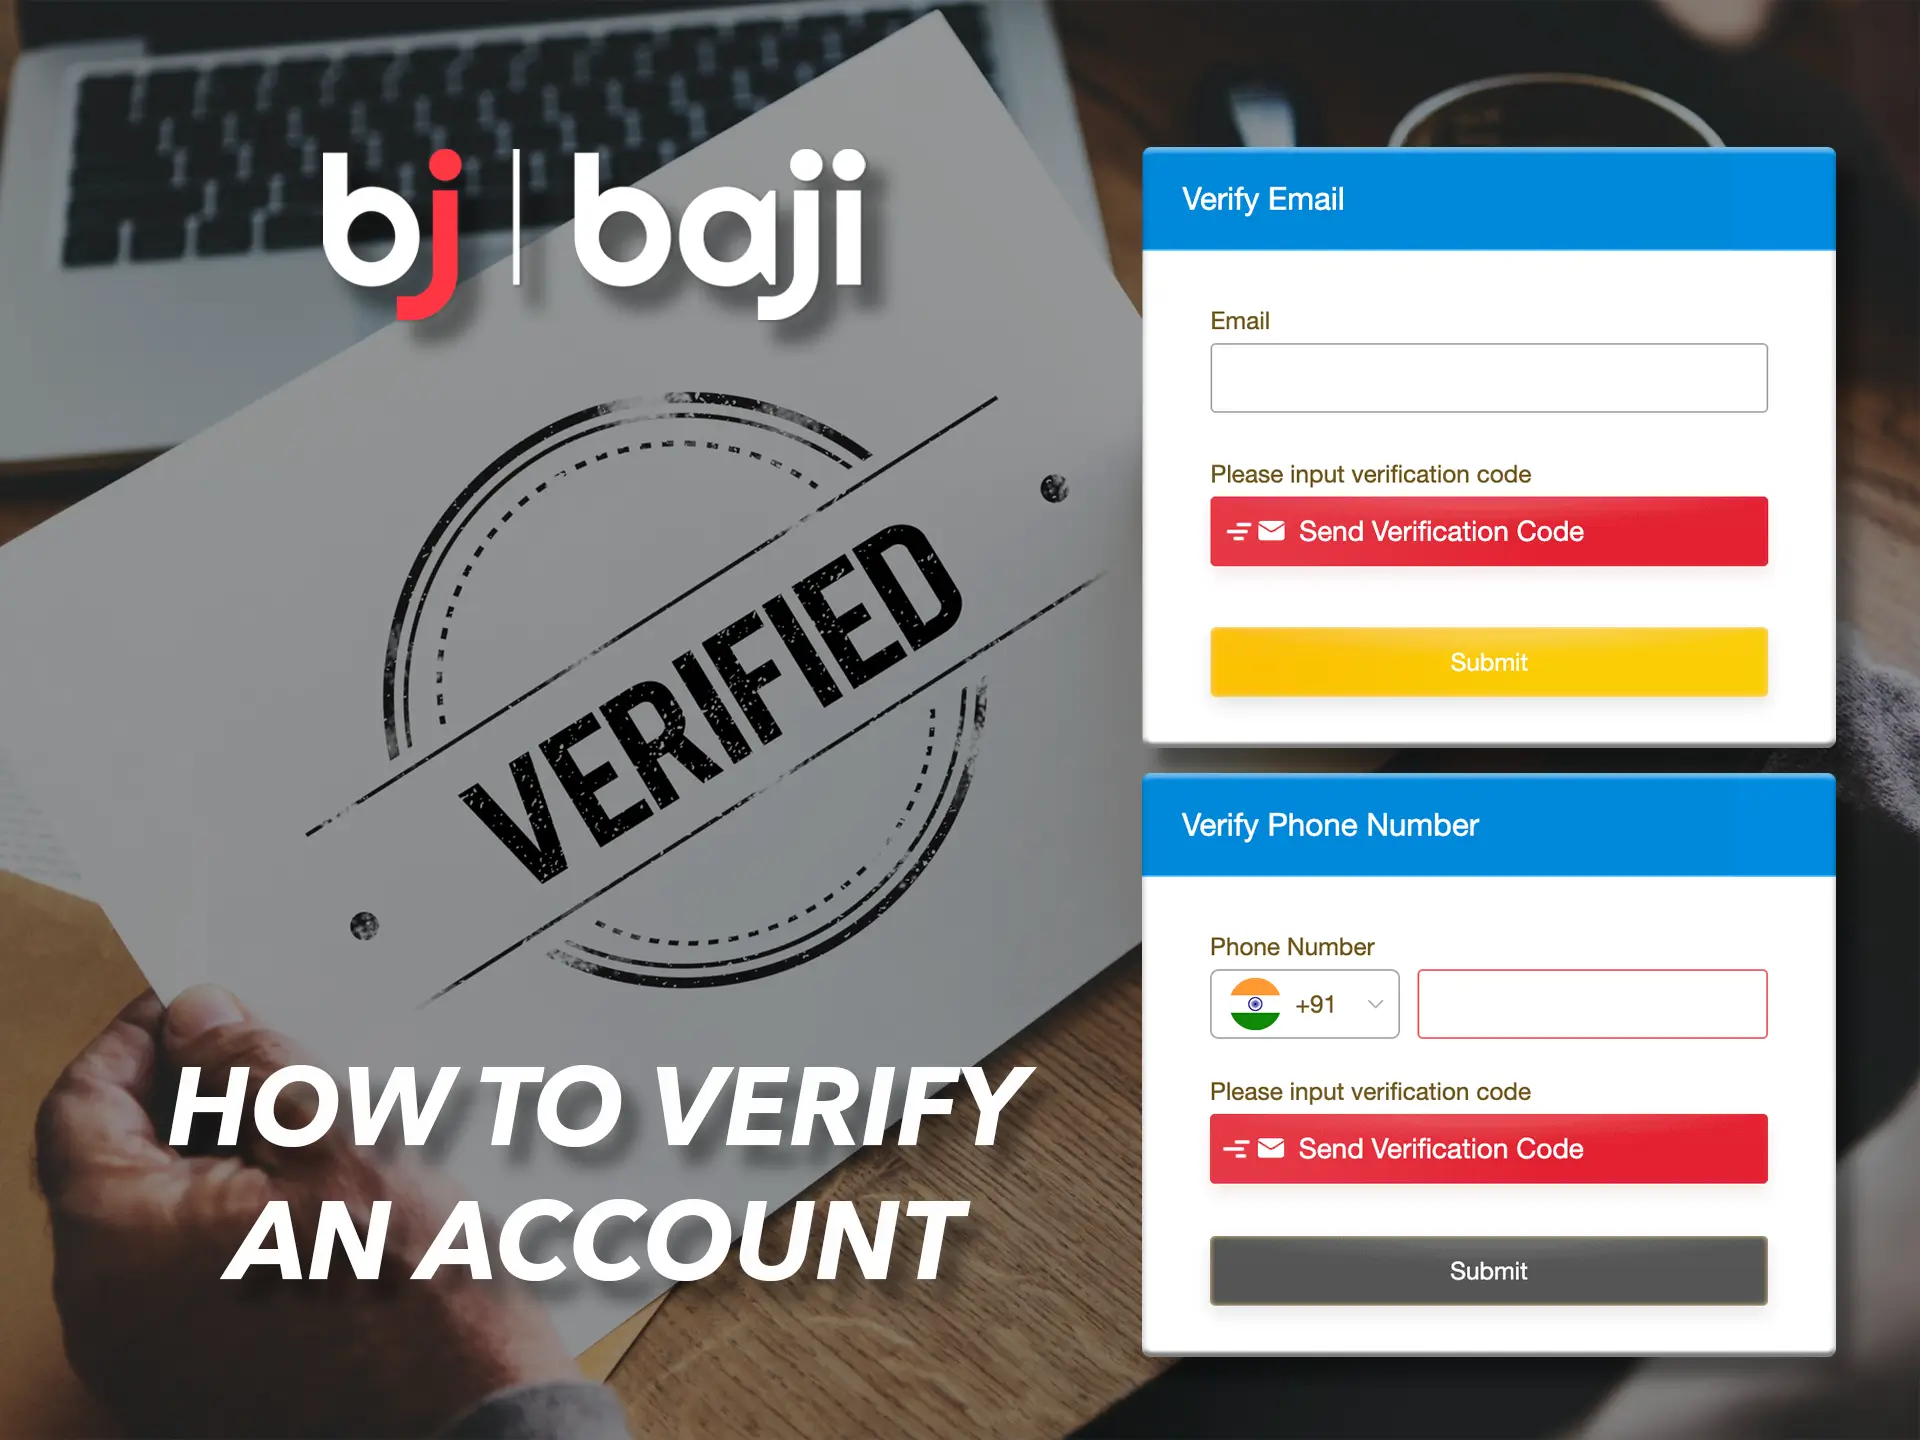 Be sure to confirm your account to get the new features of the Baji website.